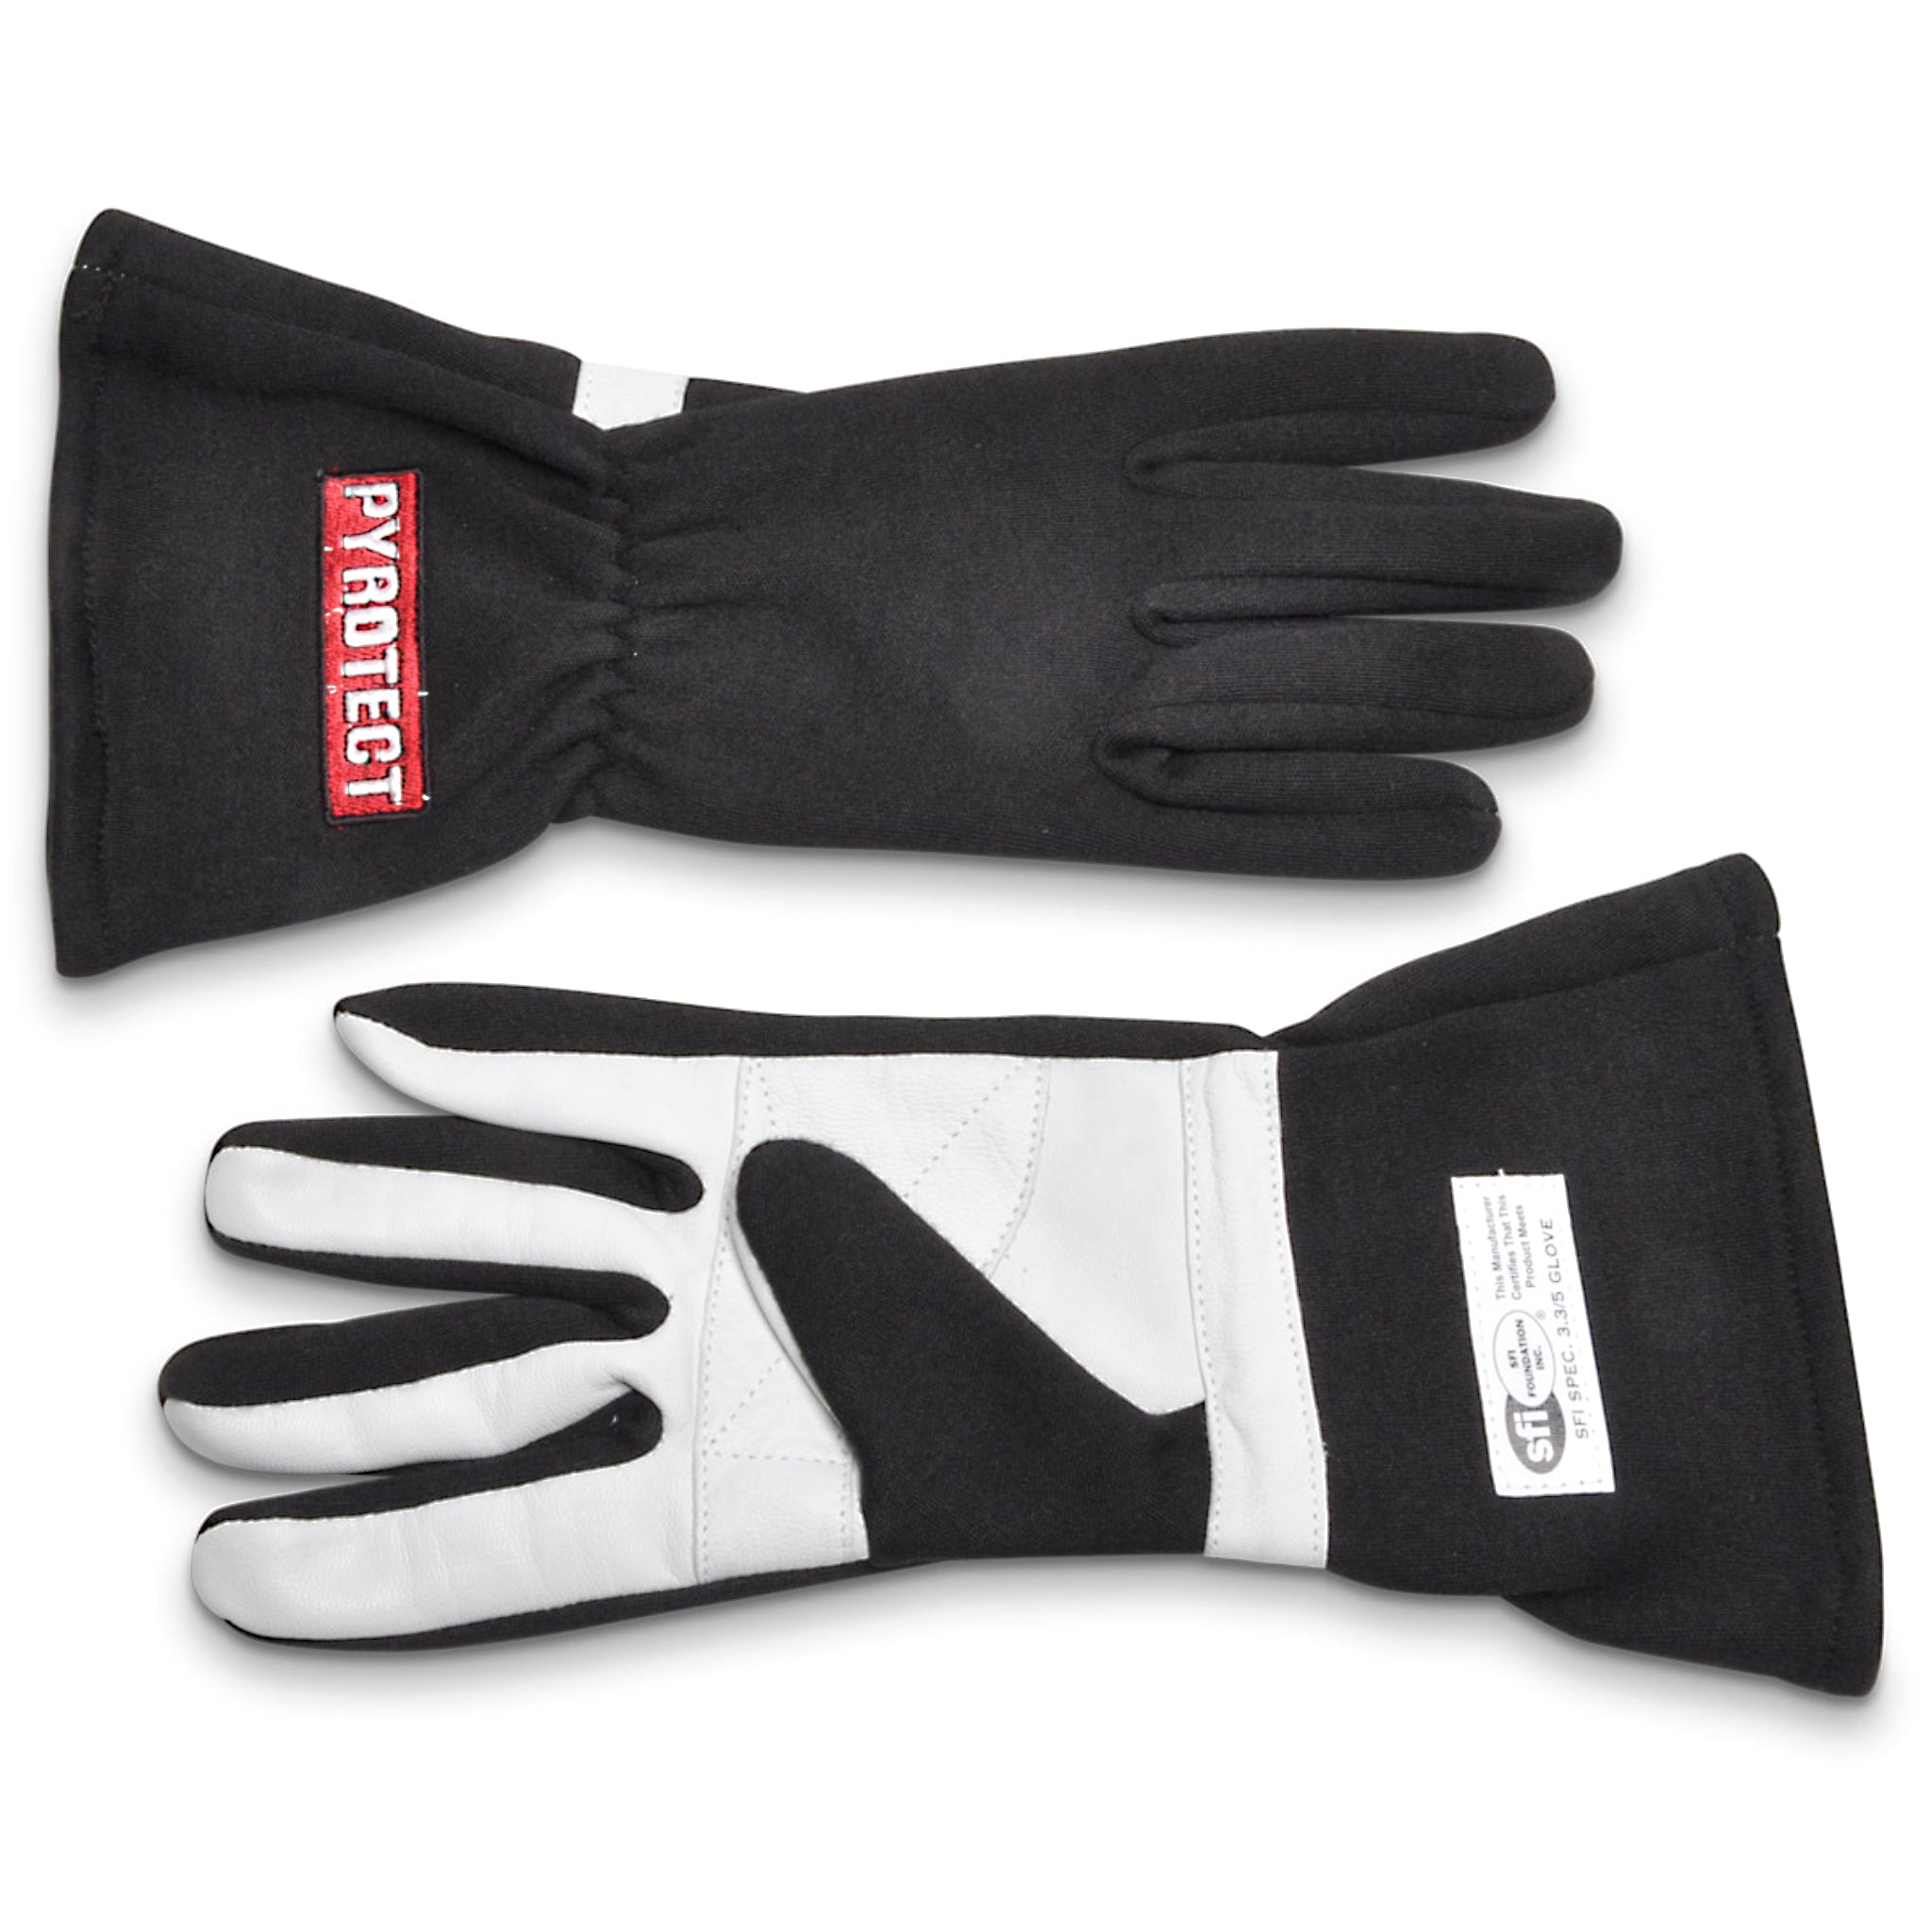 Pyrotect Glove Sport 1 Layer Blk Medium SFI-1 Safety Clothing Driving Gloves main image